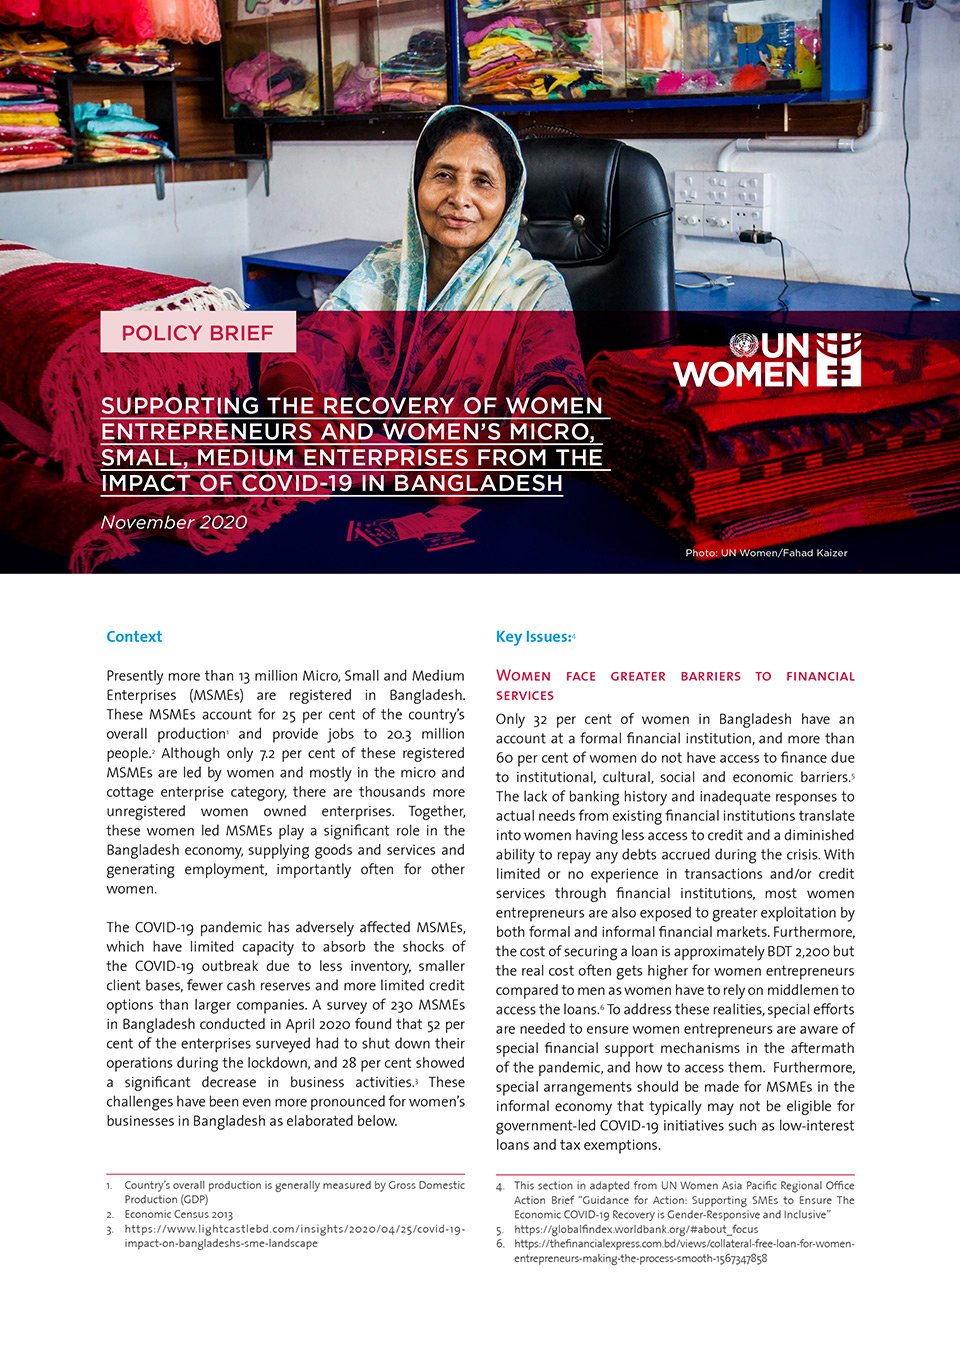 SUPPORTING THE RECOVERY OF WOMEN ENTREPRENEURS AND WOMEN’S MICRO, SMALL, MEDIUM ENTERPRISES FROM THE IMPACT OF COVID-19 IN BANGLADESH